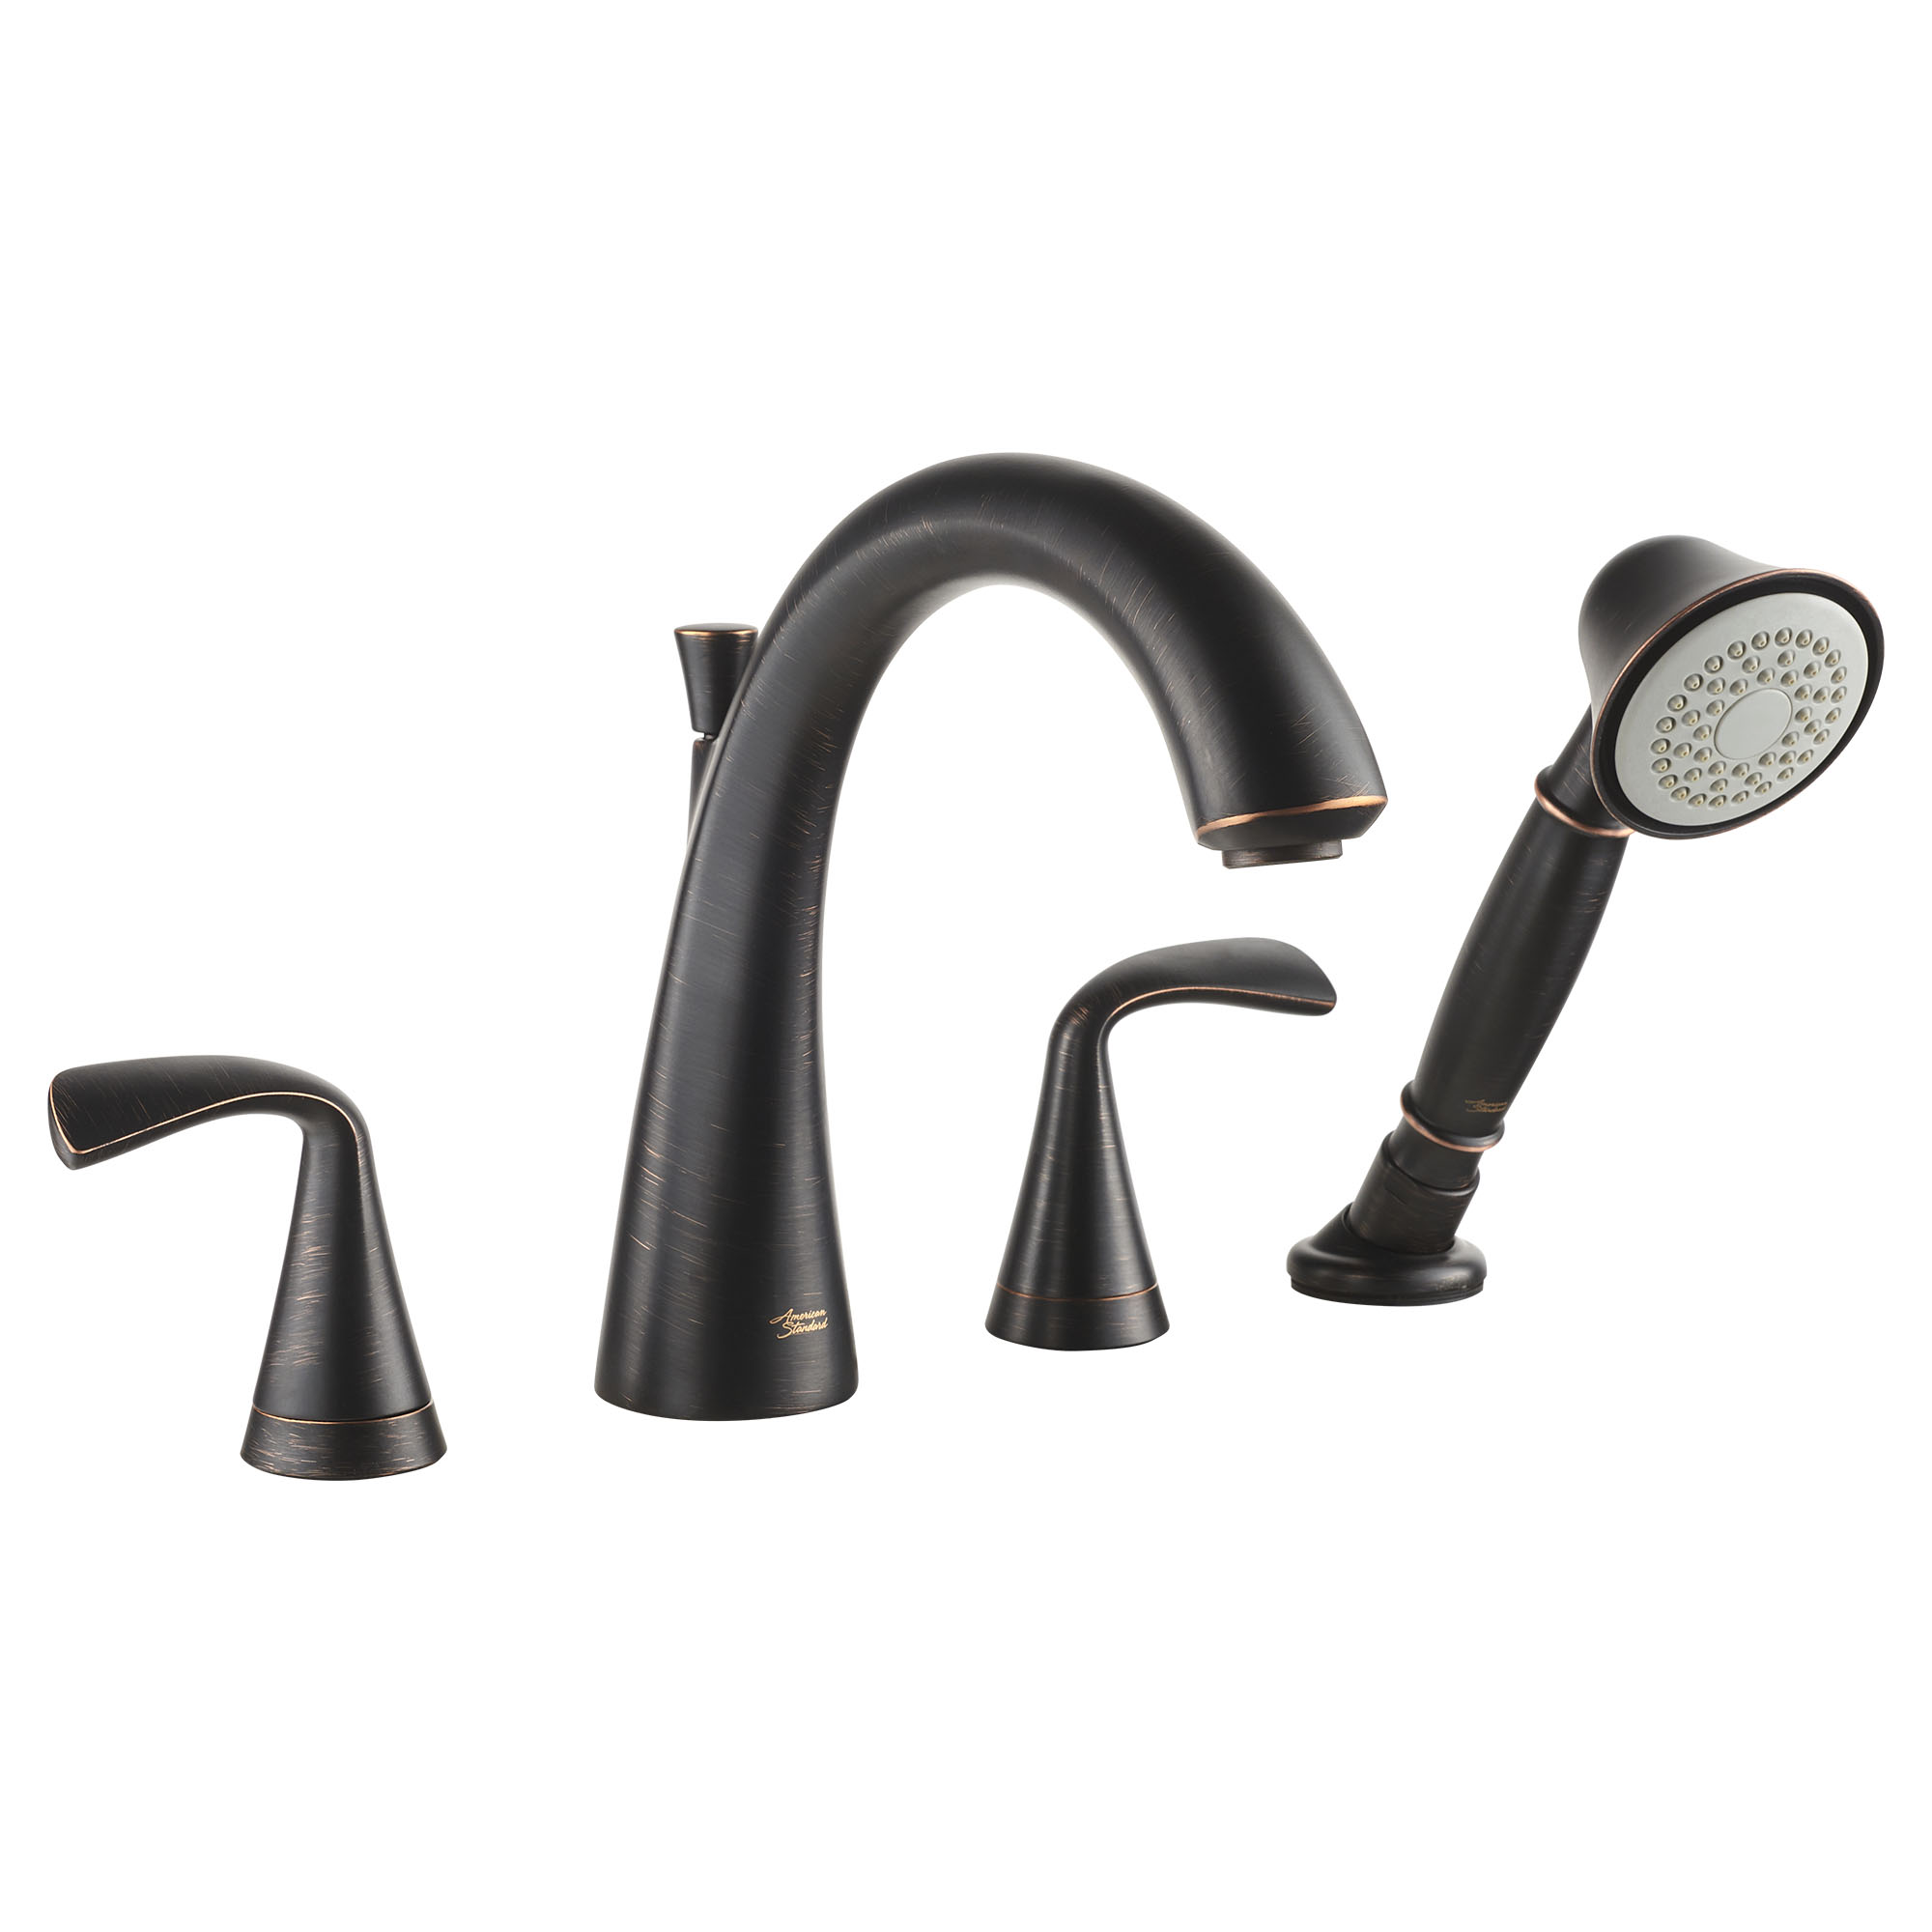 Fluent Bathtub Faucet with Personal Shower for Flash Rough-in Valve with Lever Handles